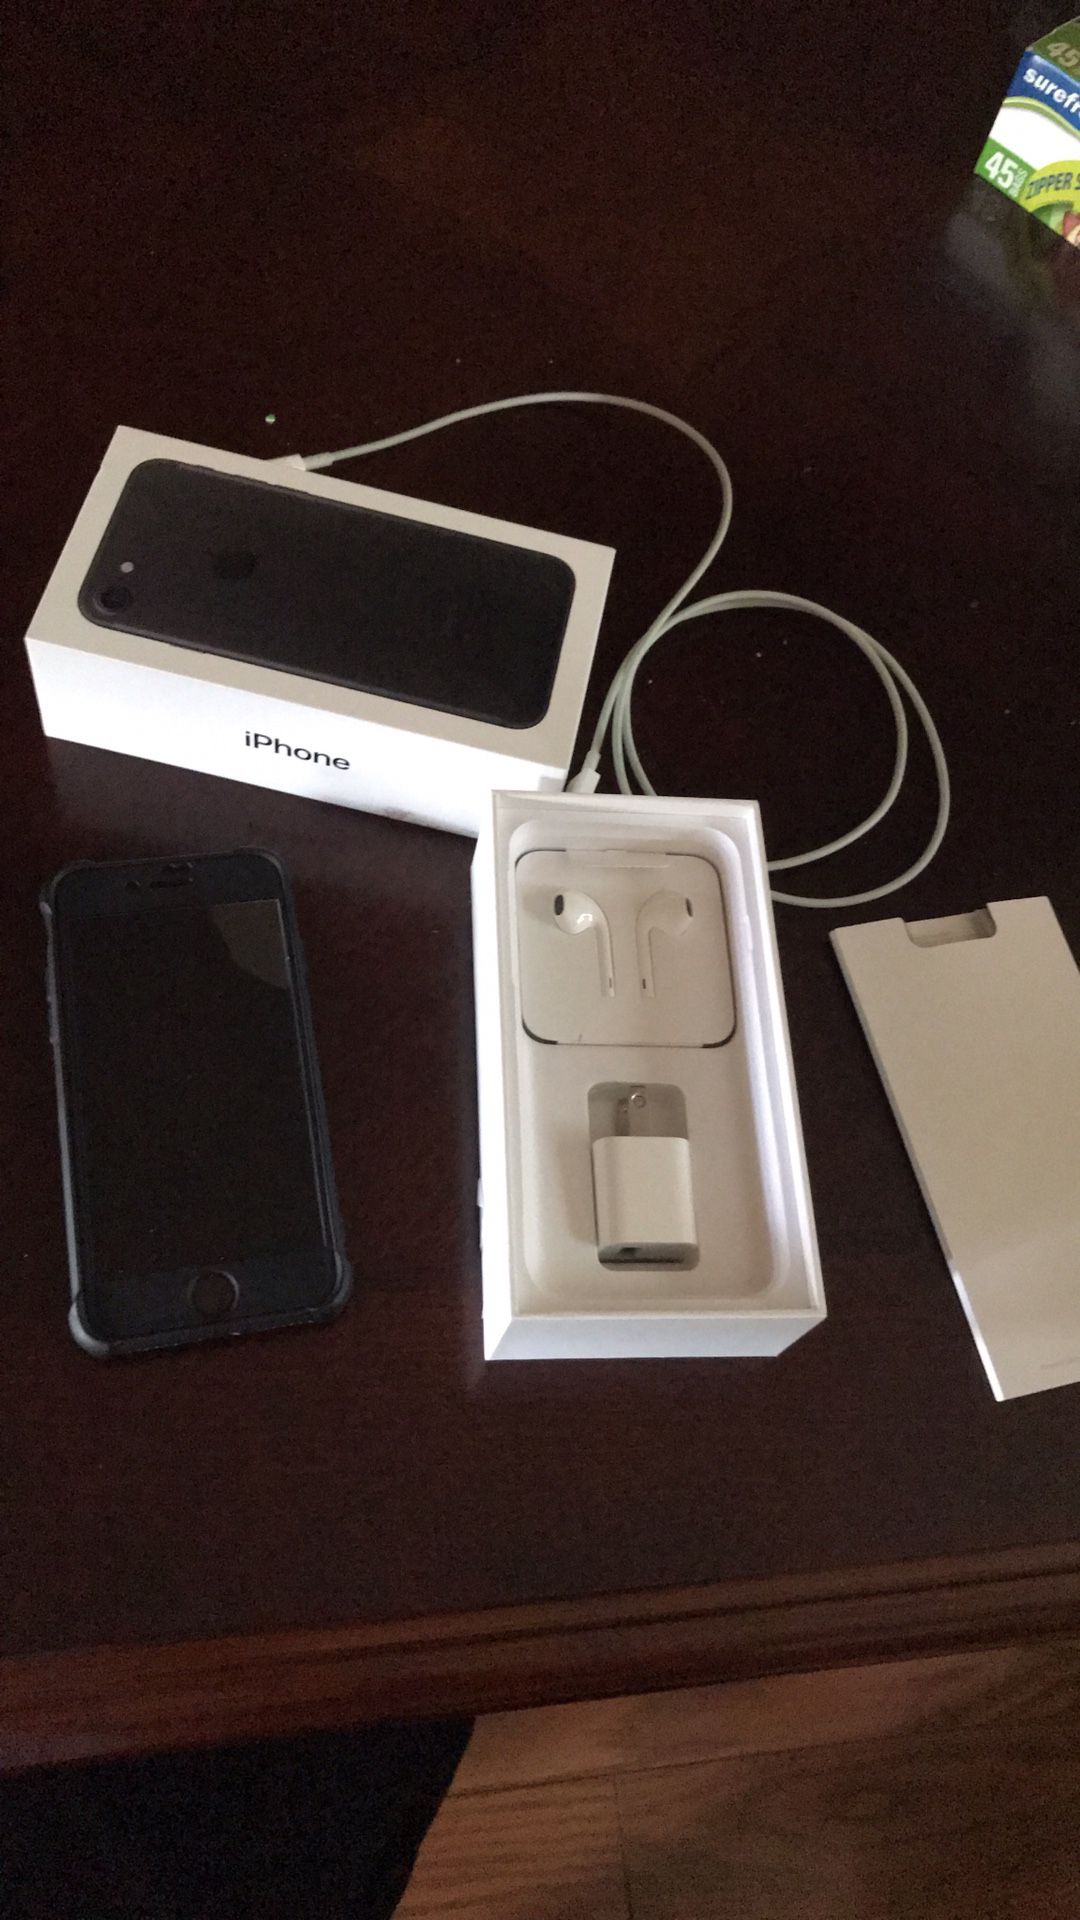 At&t PREPAID Apple iPhone 7 32gb, $125 GOOD CONDITION... charger brand new headphonez and a phone case are in cluded